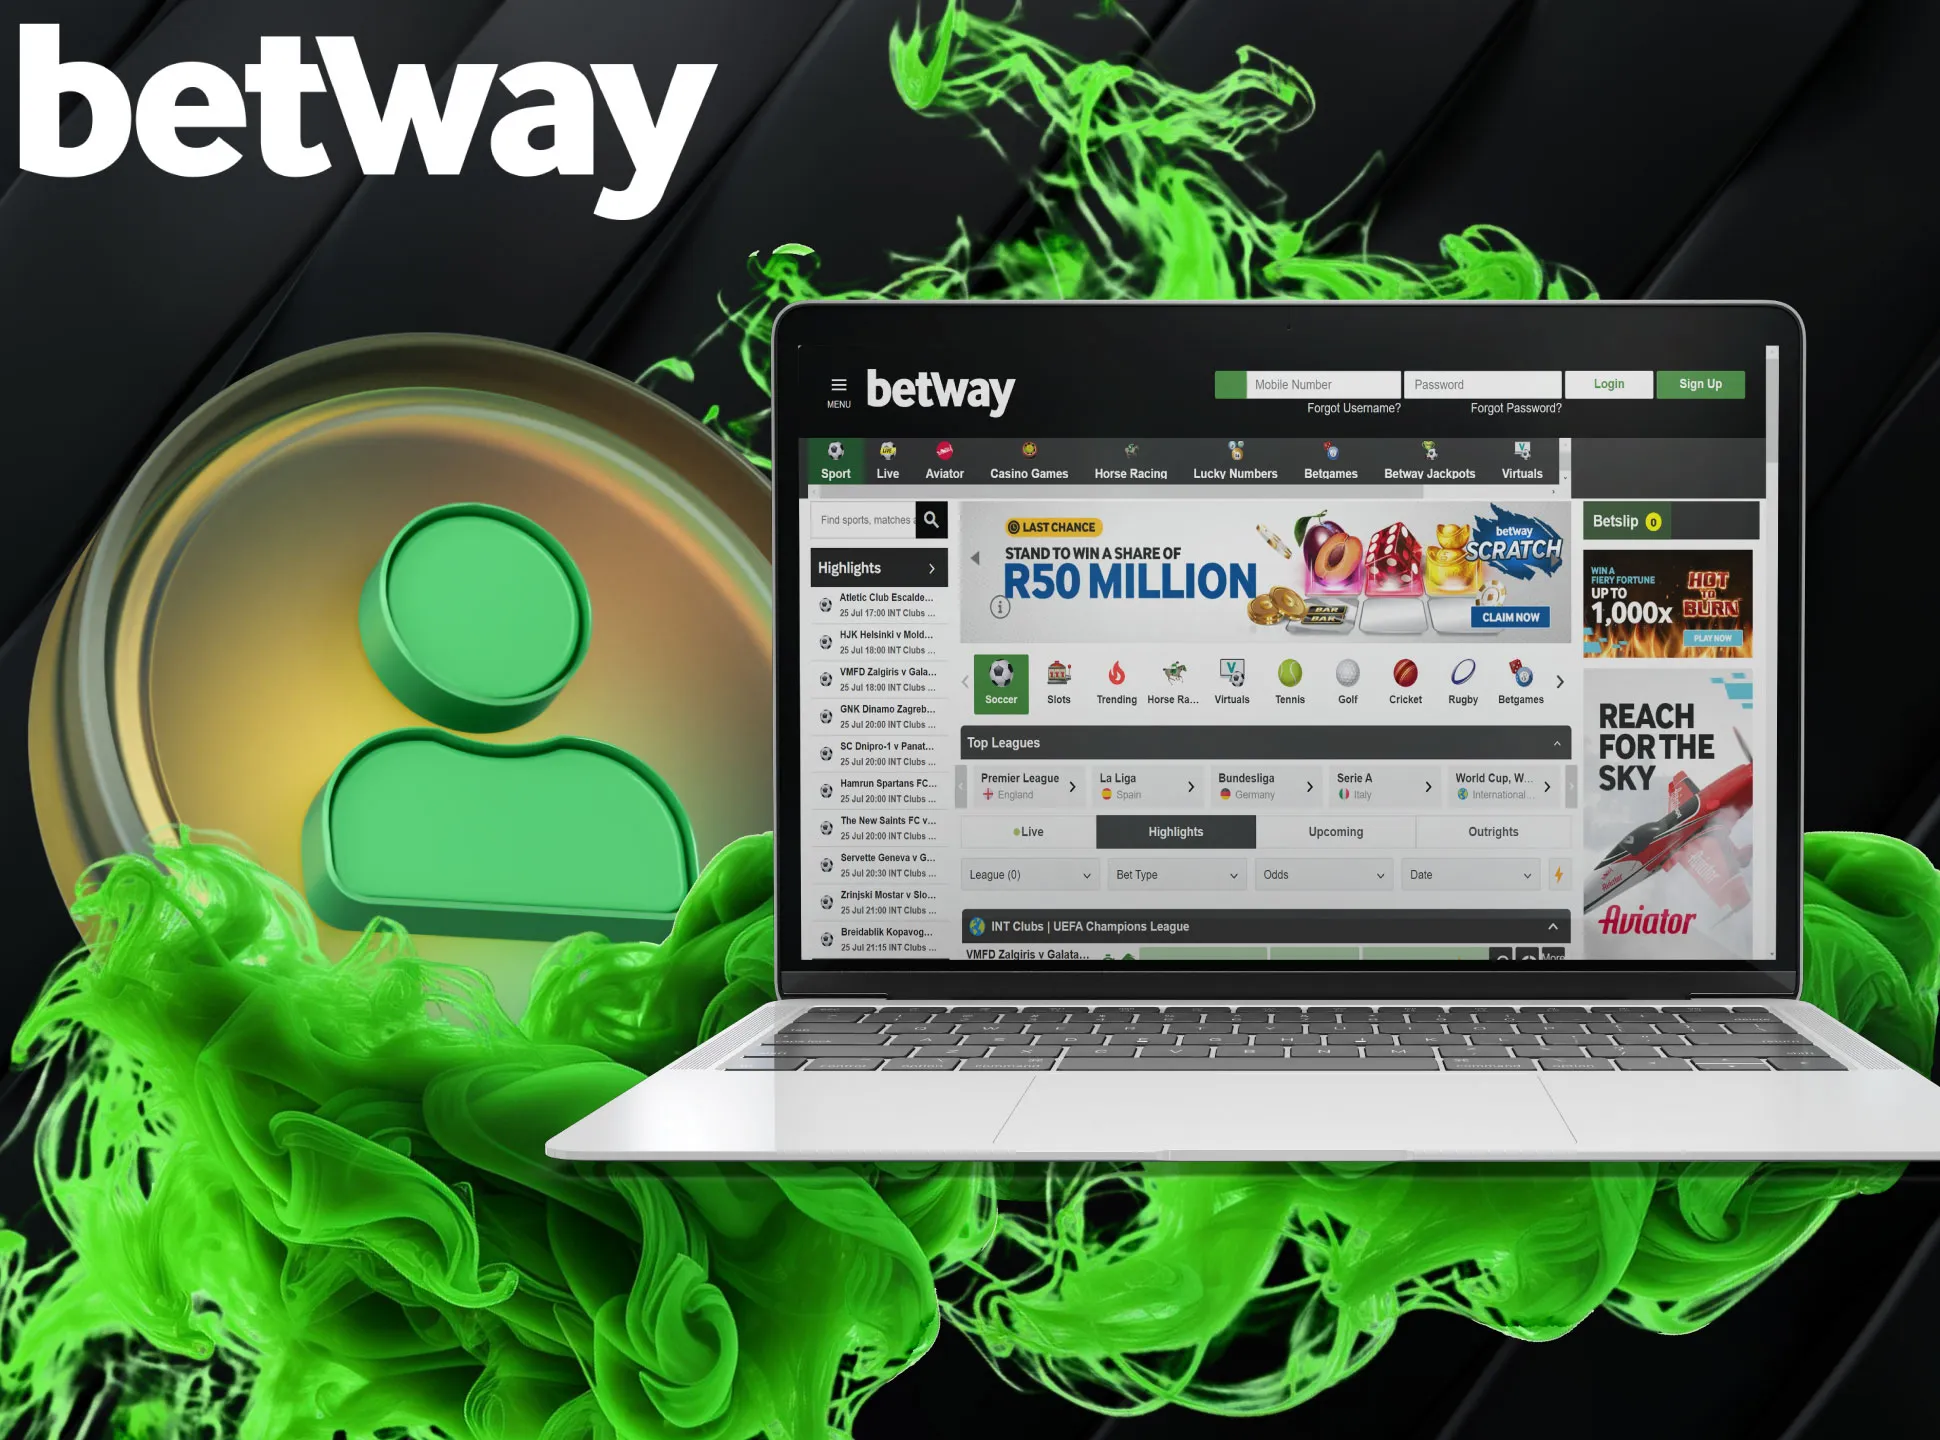 You can log in to your Betway account using your username and a password.